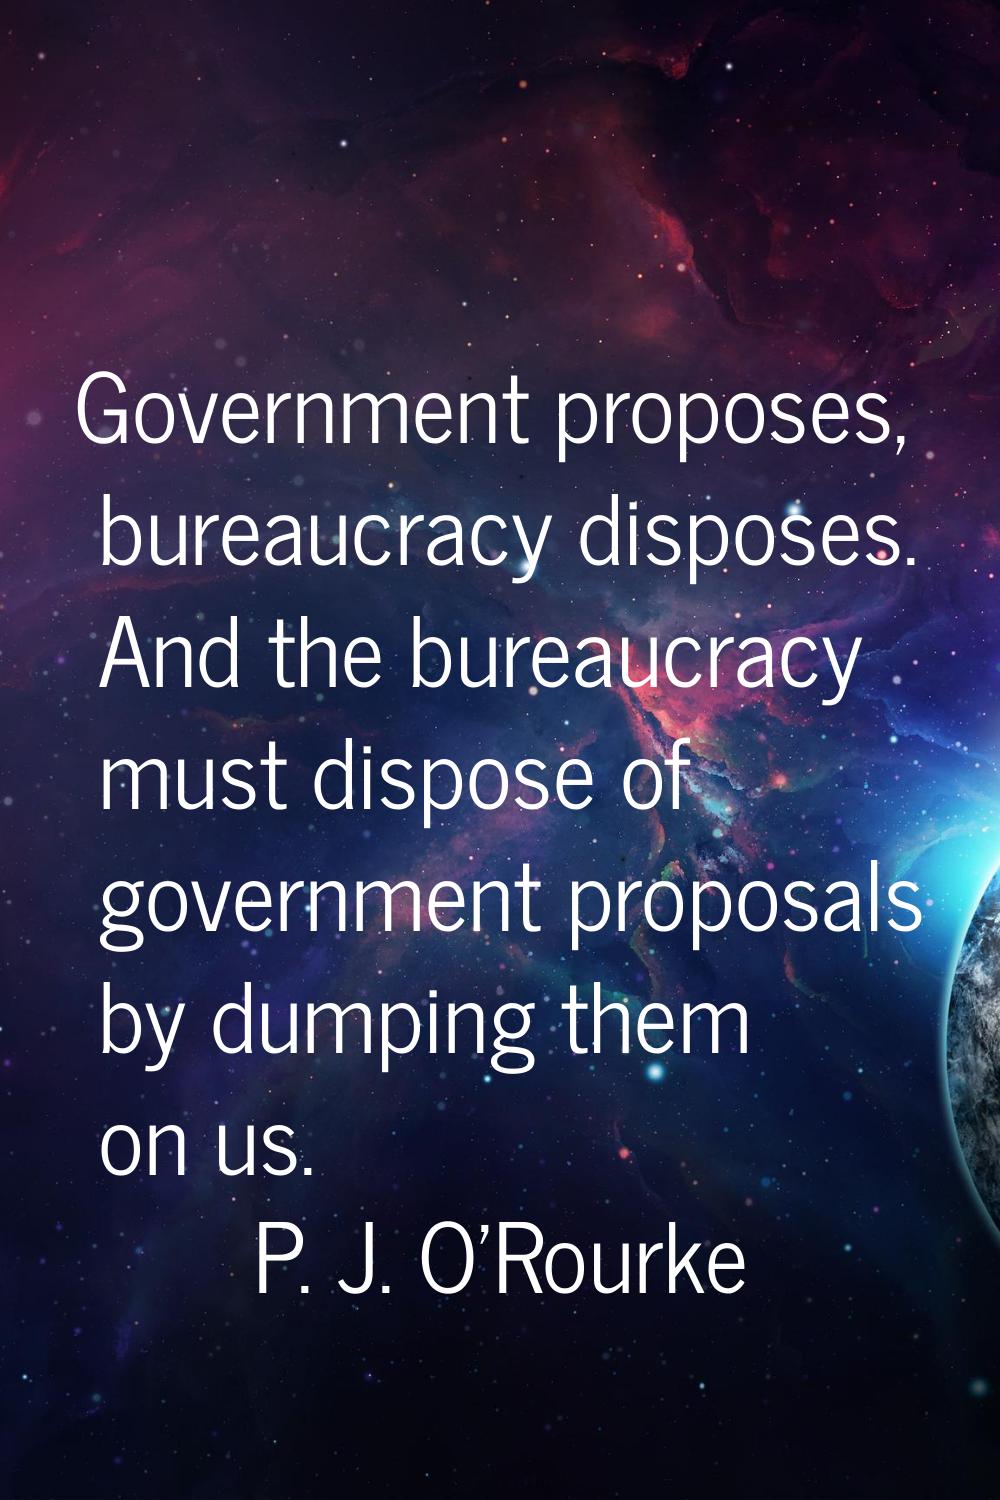 Government proposes, bureaucracy disposes. And the bureaucracy must dispose of government proposals